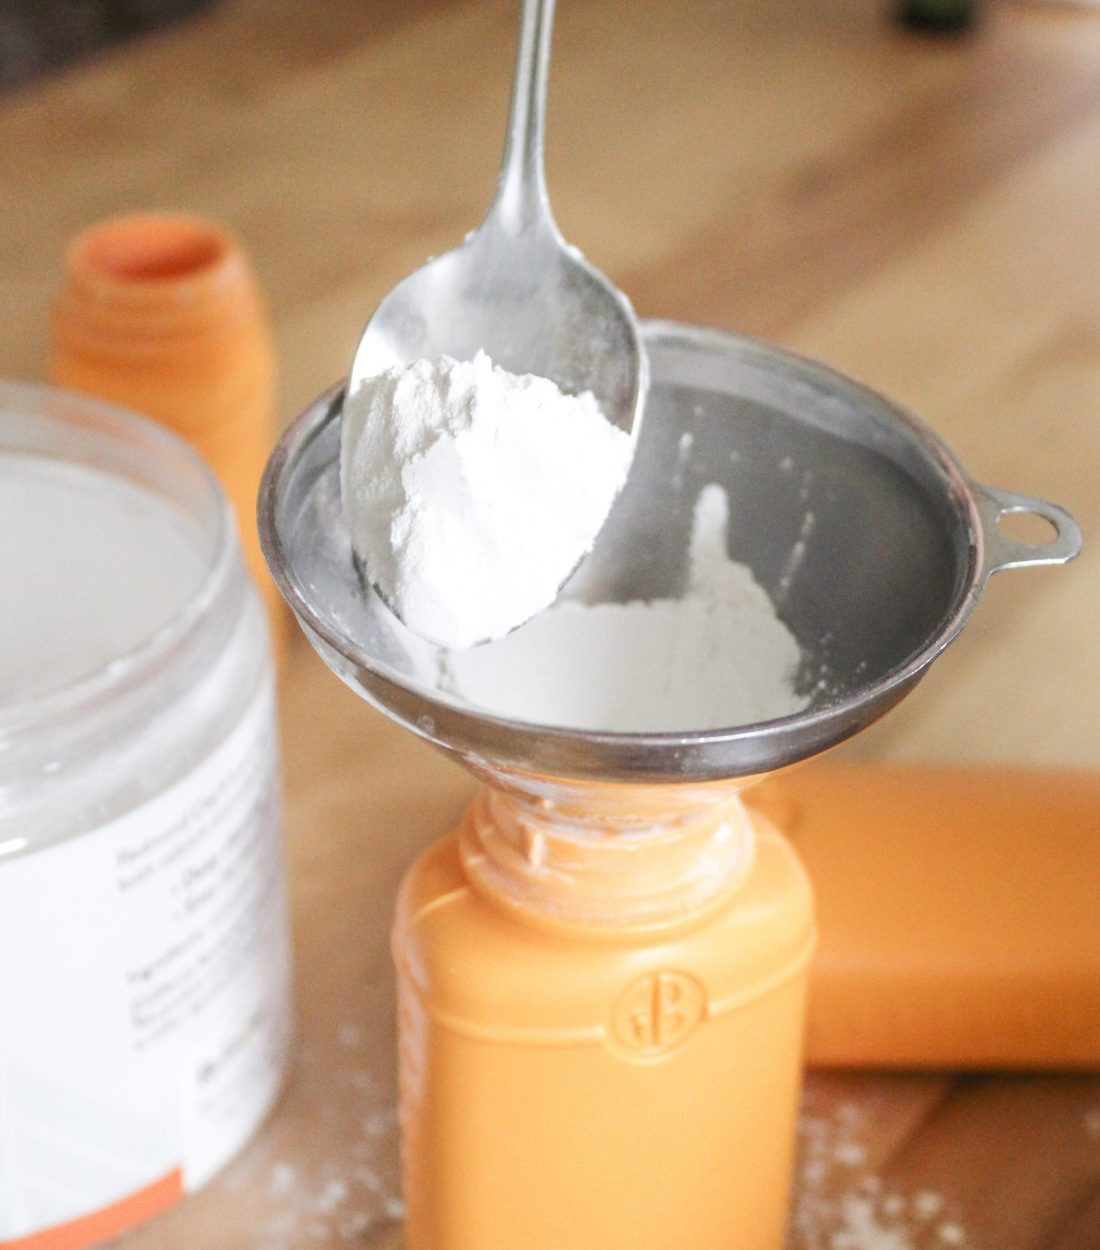 DIY Baby Powder
 The Best DIY Baby Powder Simple Cheap and Incredibly Safe